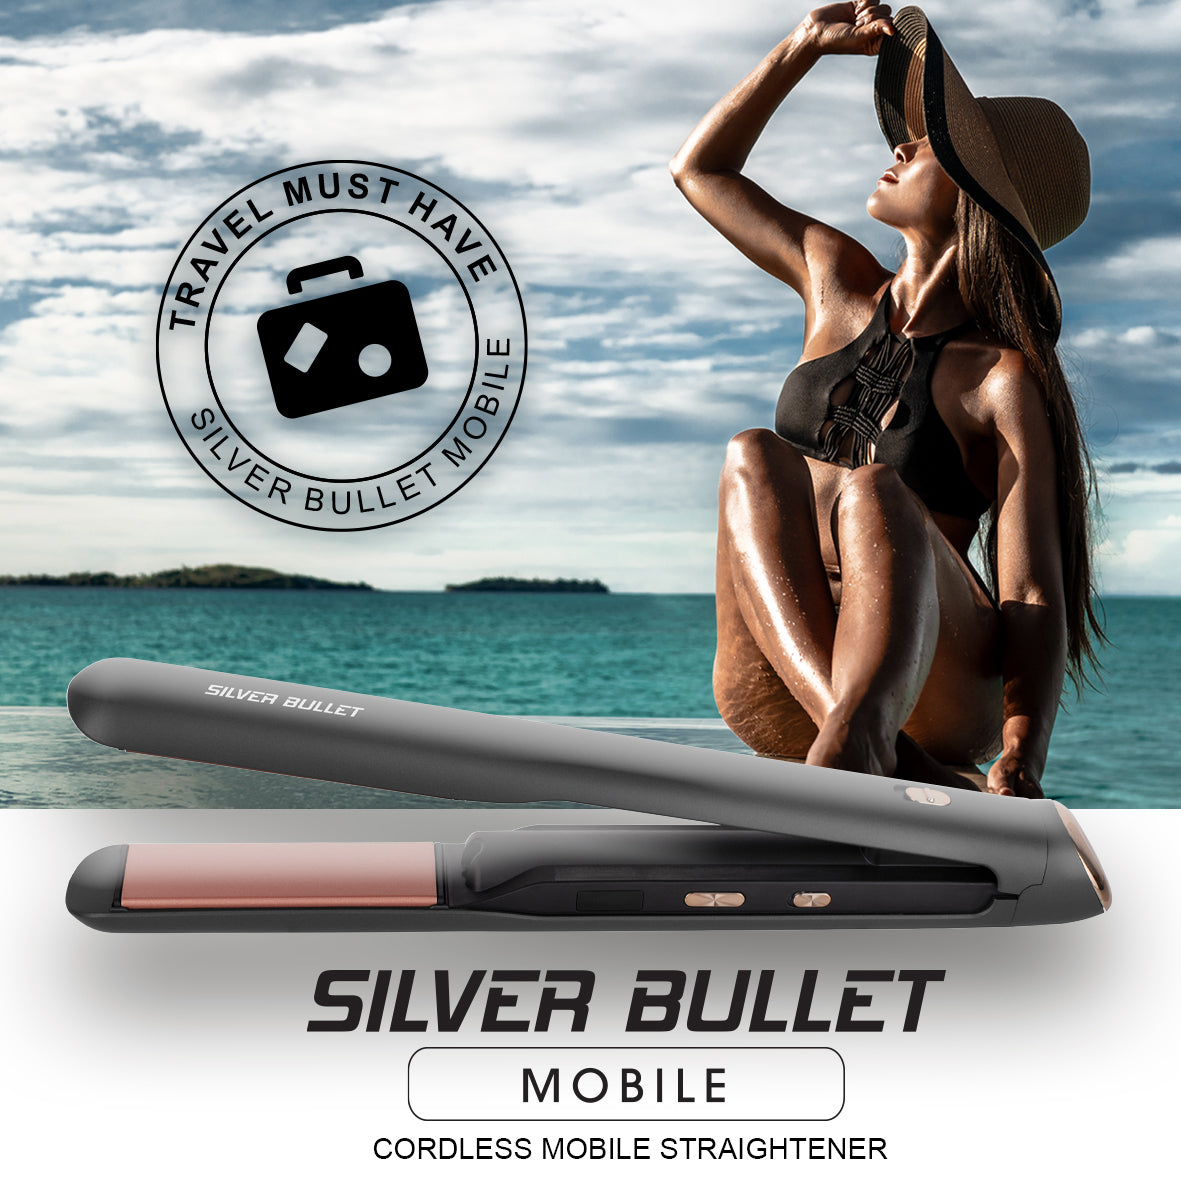 Silver Bullet Mobile Straightener Cordless (25mm) Travel must-have!